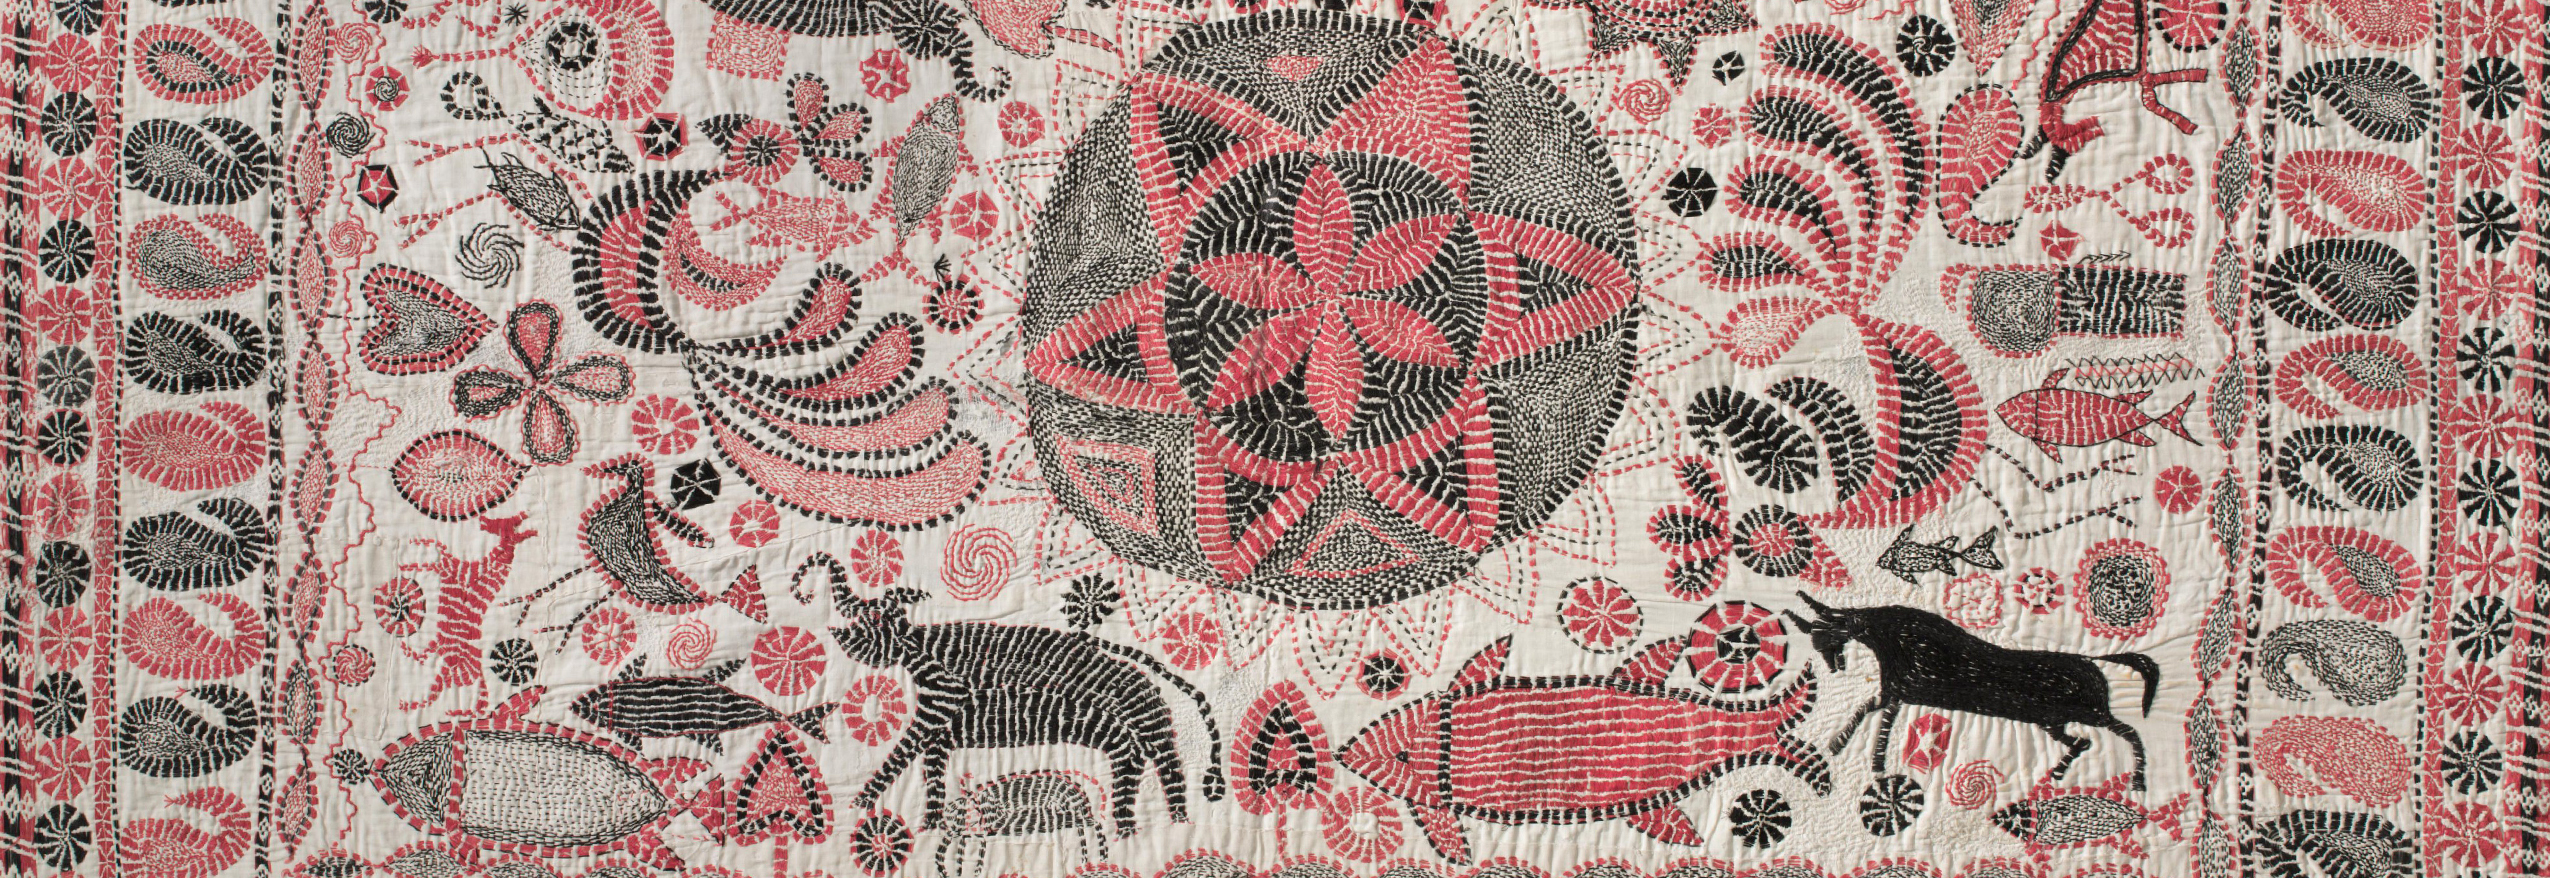 Through the Eye of the Needle: Embroidery and Appliqué in the Subcontinent  - MAP Academy